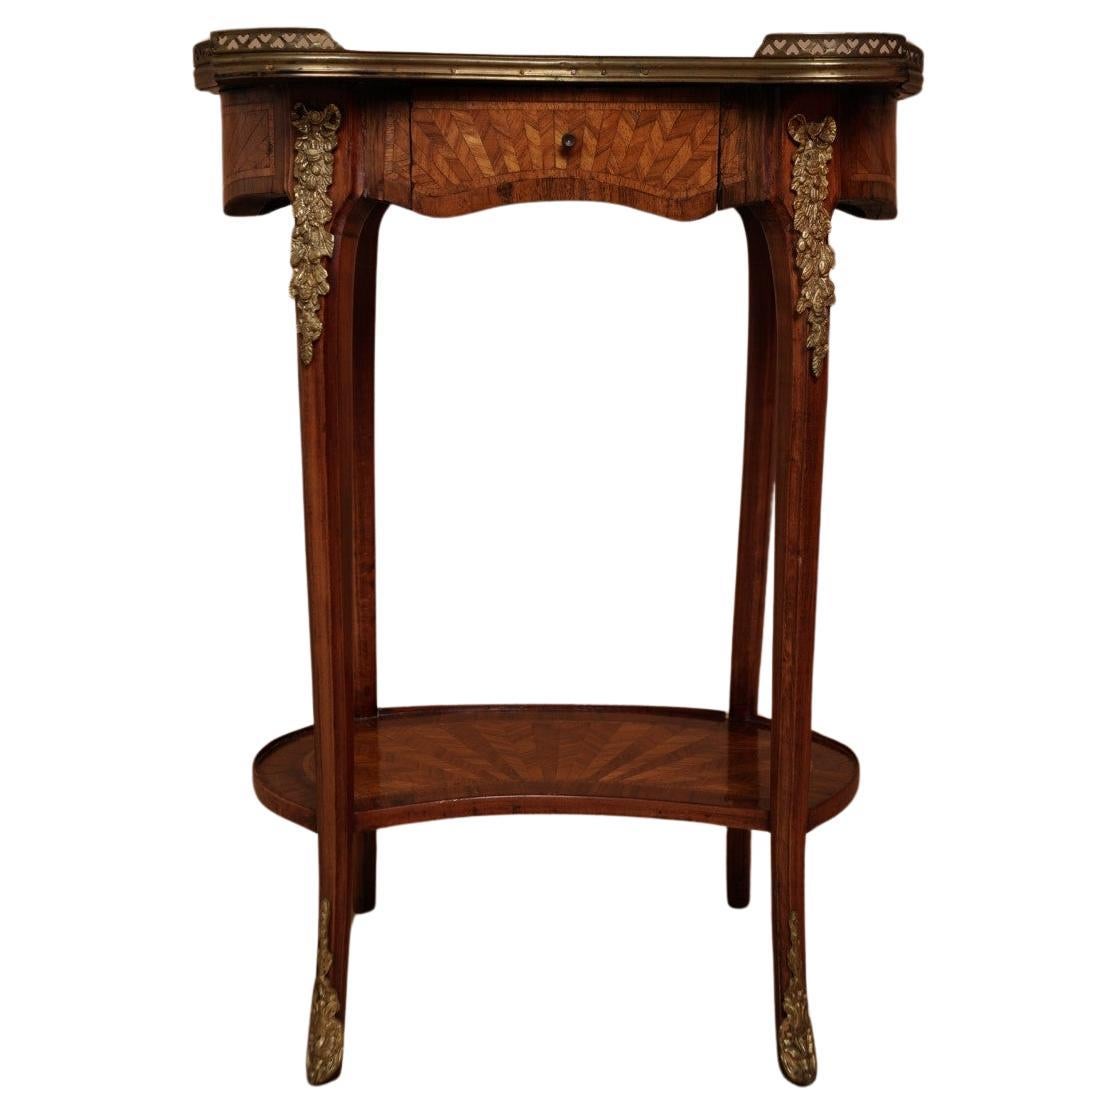 20th Century French Side Table in Louis XV Style.